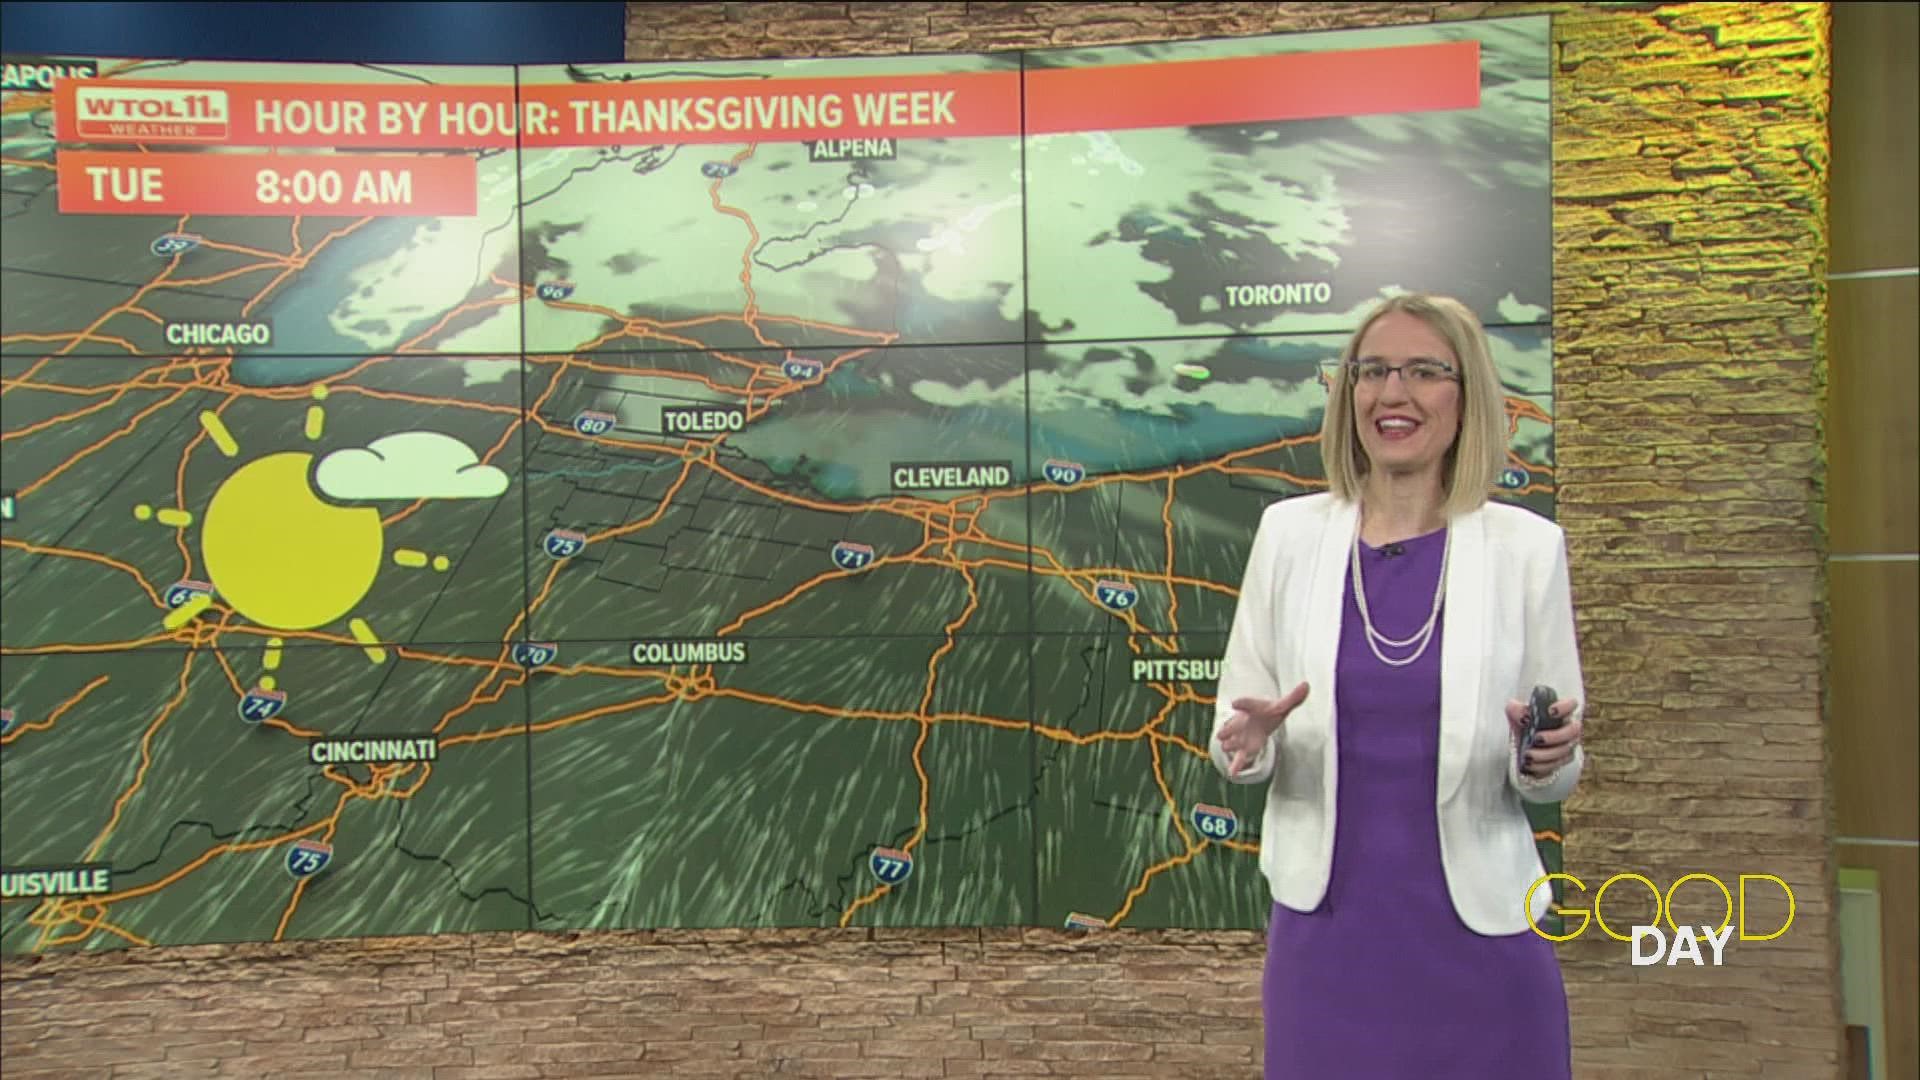 Expect sunshine and temps in the 50s through the rest of the week for Thanksgiving travel and festivities.